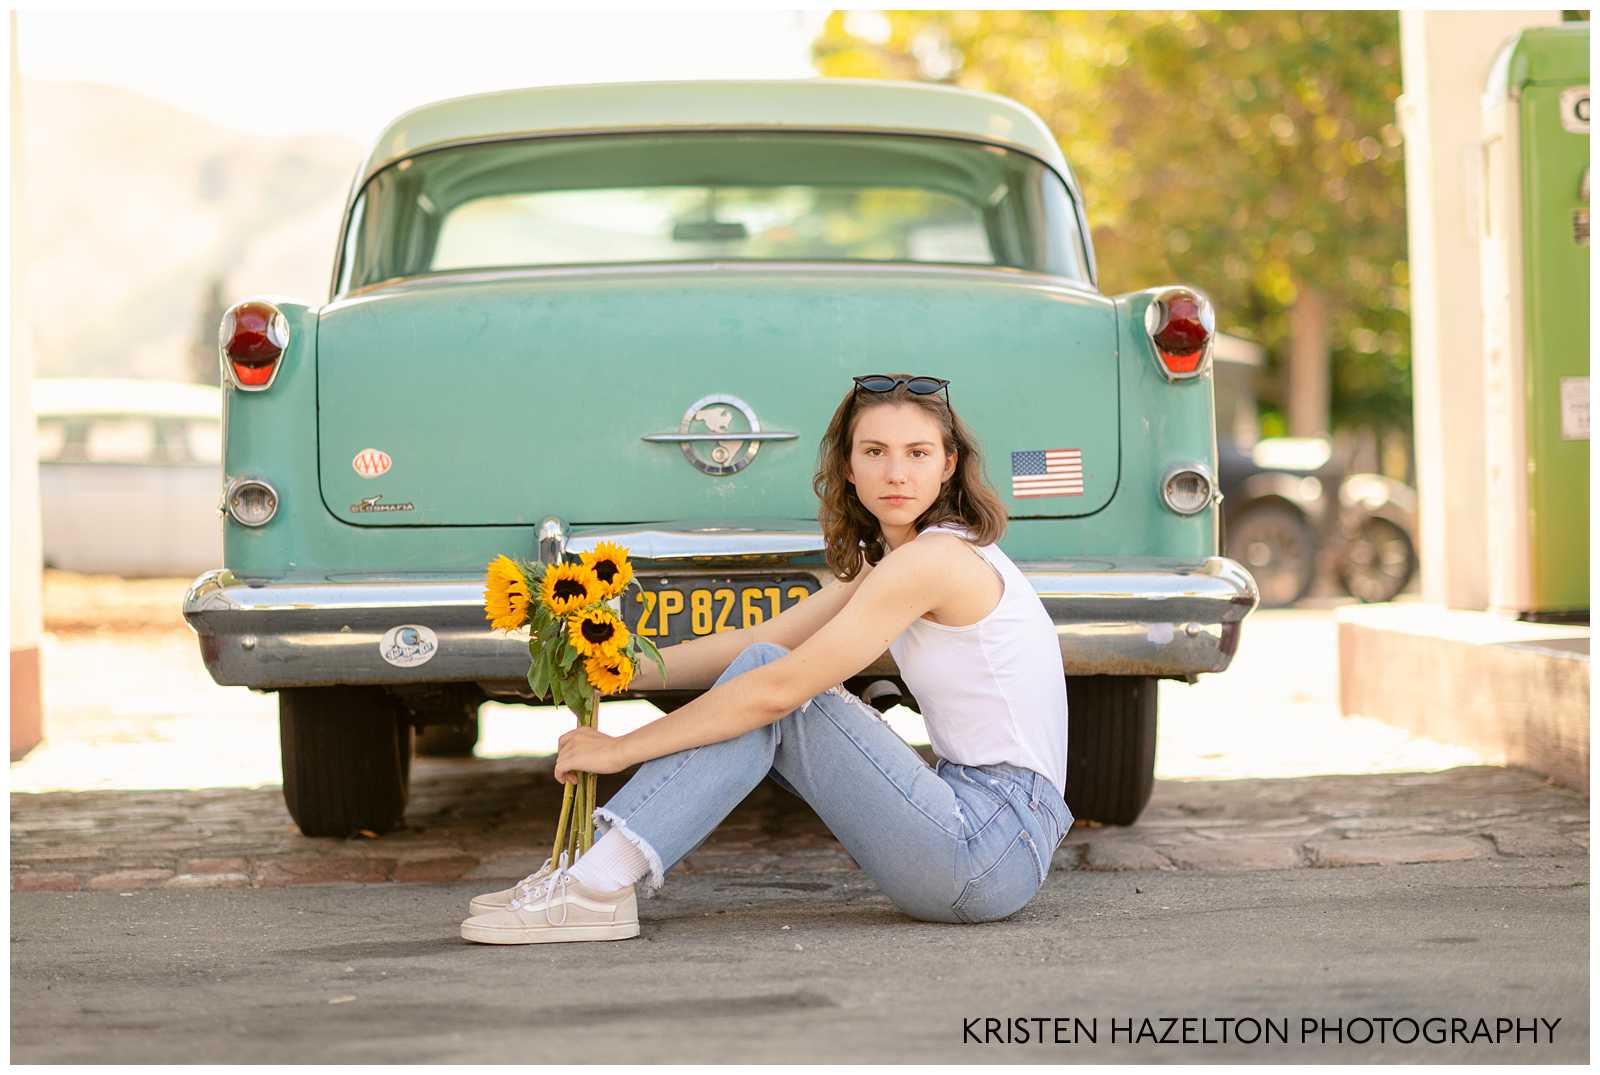 Gas station senior photos with a retro vibe: senior with sunglasses on her head, white tank top, blue jeans, and sunflowers, seated next to a teal classic car